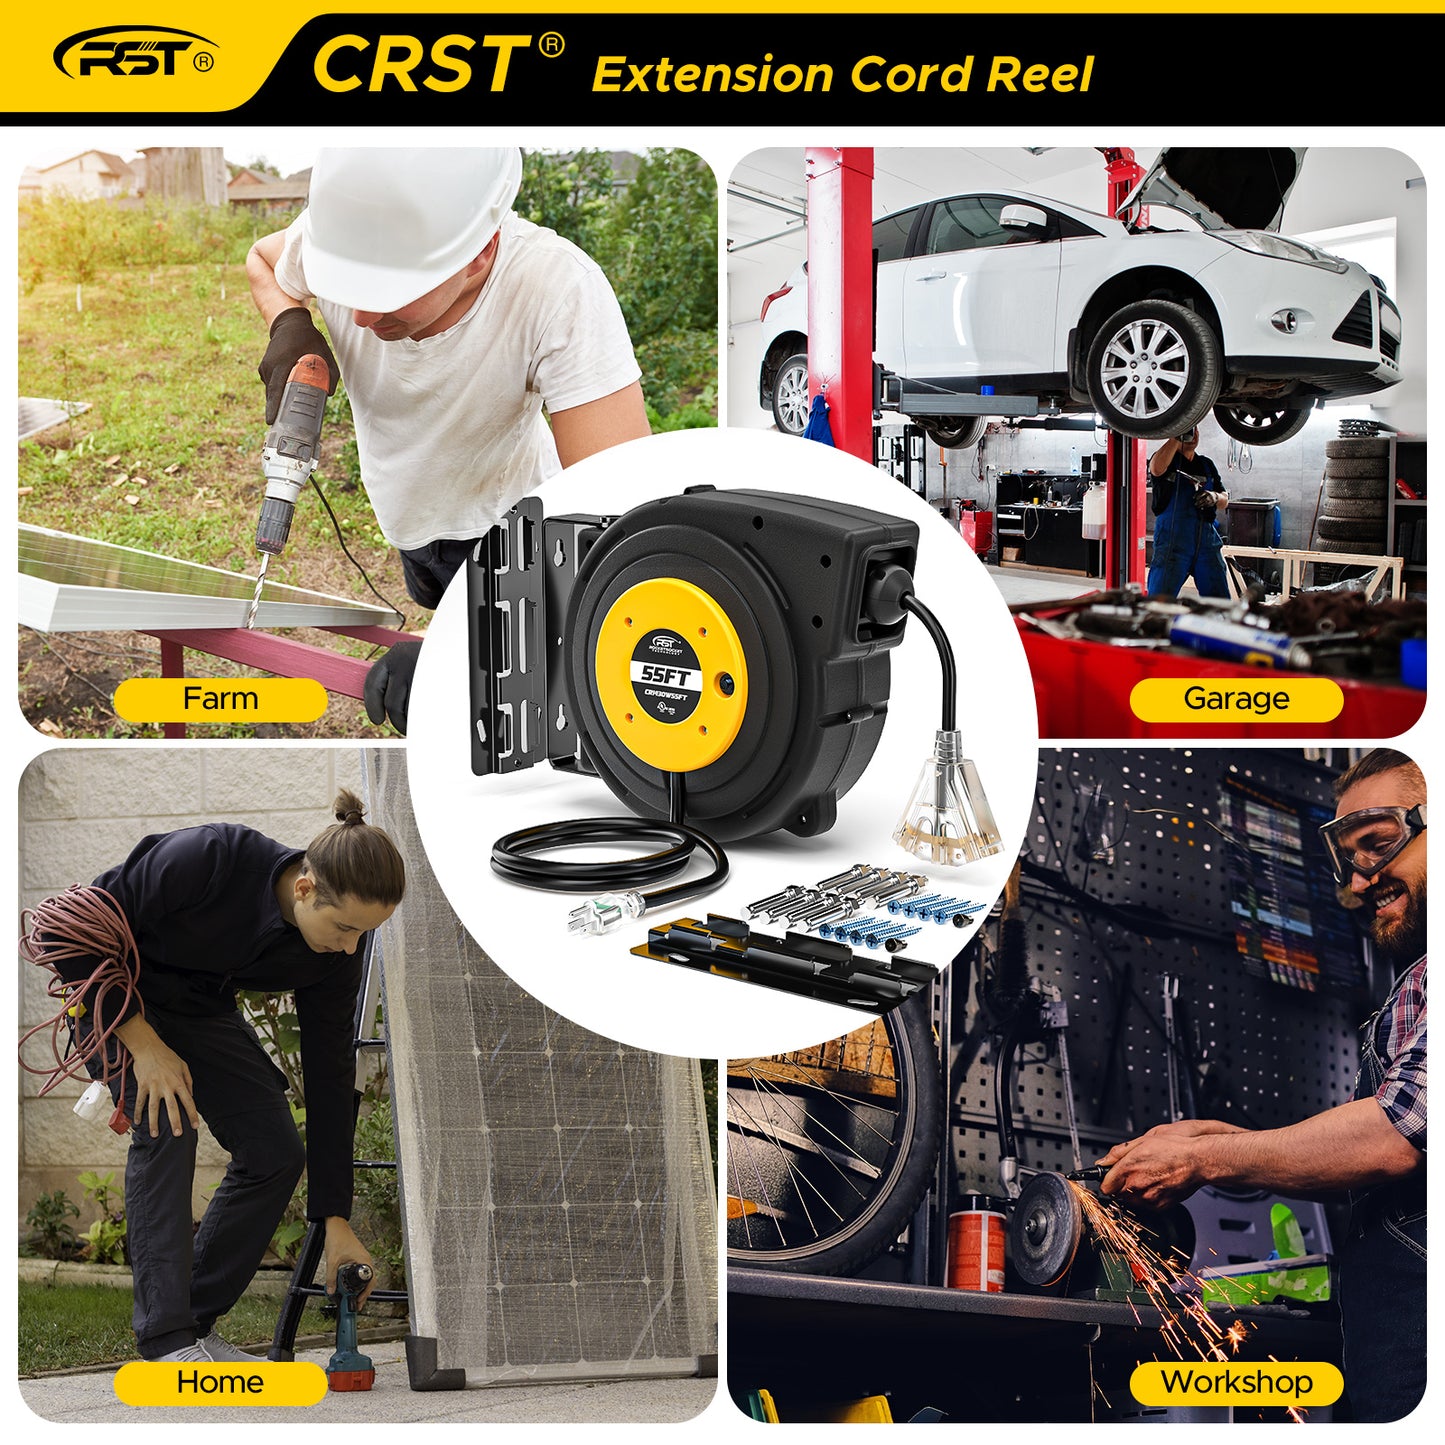 CRST Extension Cord Reel 55feet Retractable Extension Cord with Reset Push Lighted Triple Outlet Adjustable Stopper and Mounting Kit Size